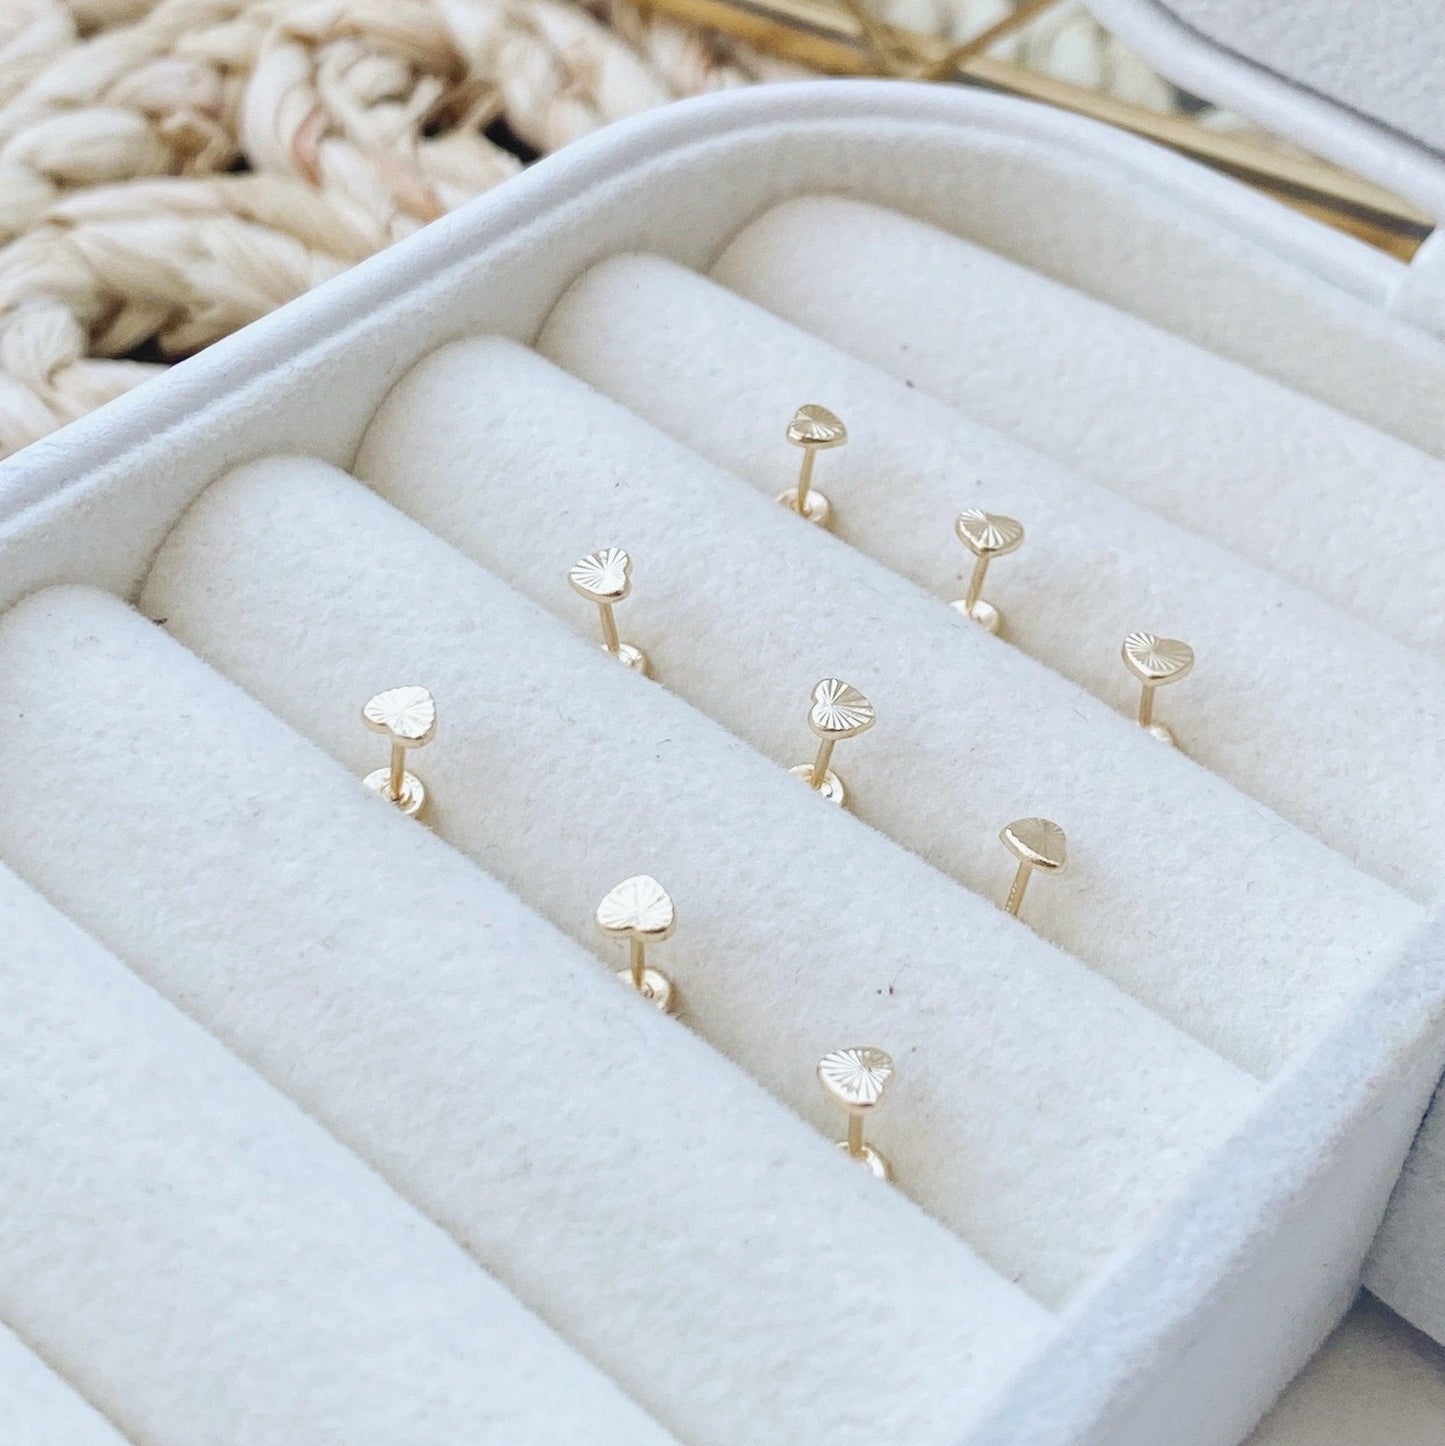 Our dainty tiny heart earrings are perfect for everyday wear and make the perfect gift! The second hole screw back earring is a great way to dress up any look, be it casual or dressy. 